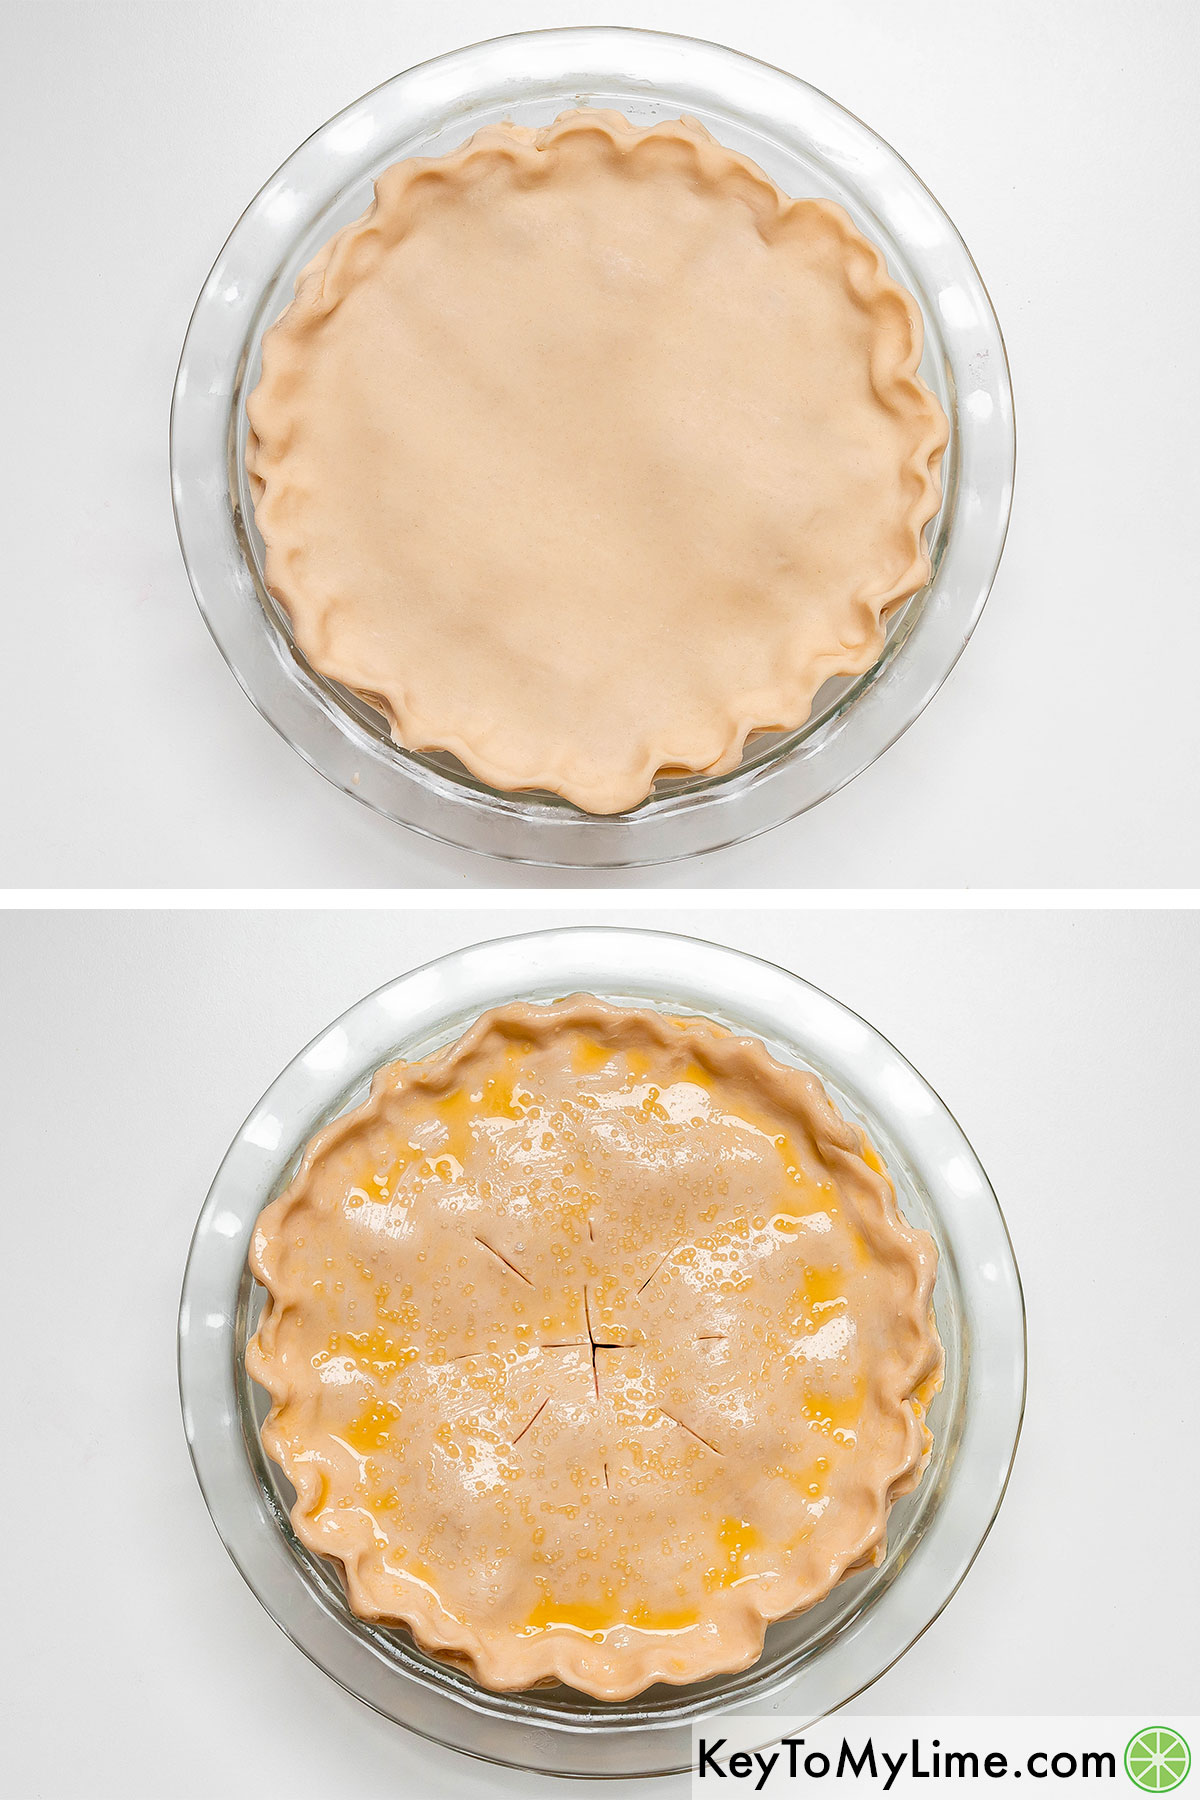 Attaching the top pie crust and brushing with egg and sprinkling with coarse sugar.